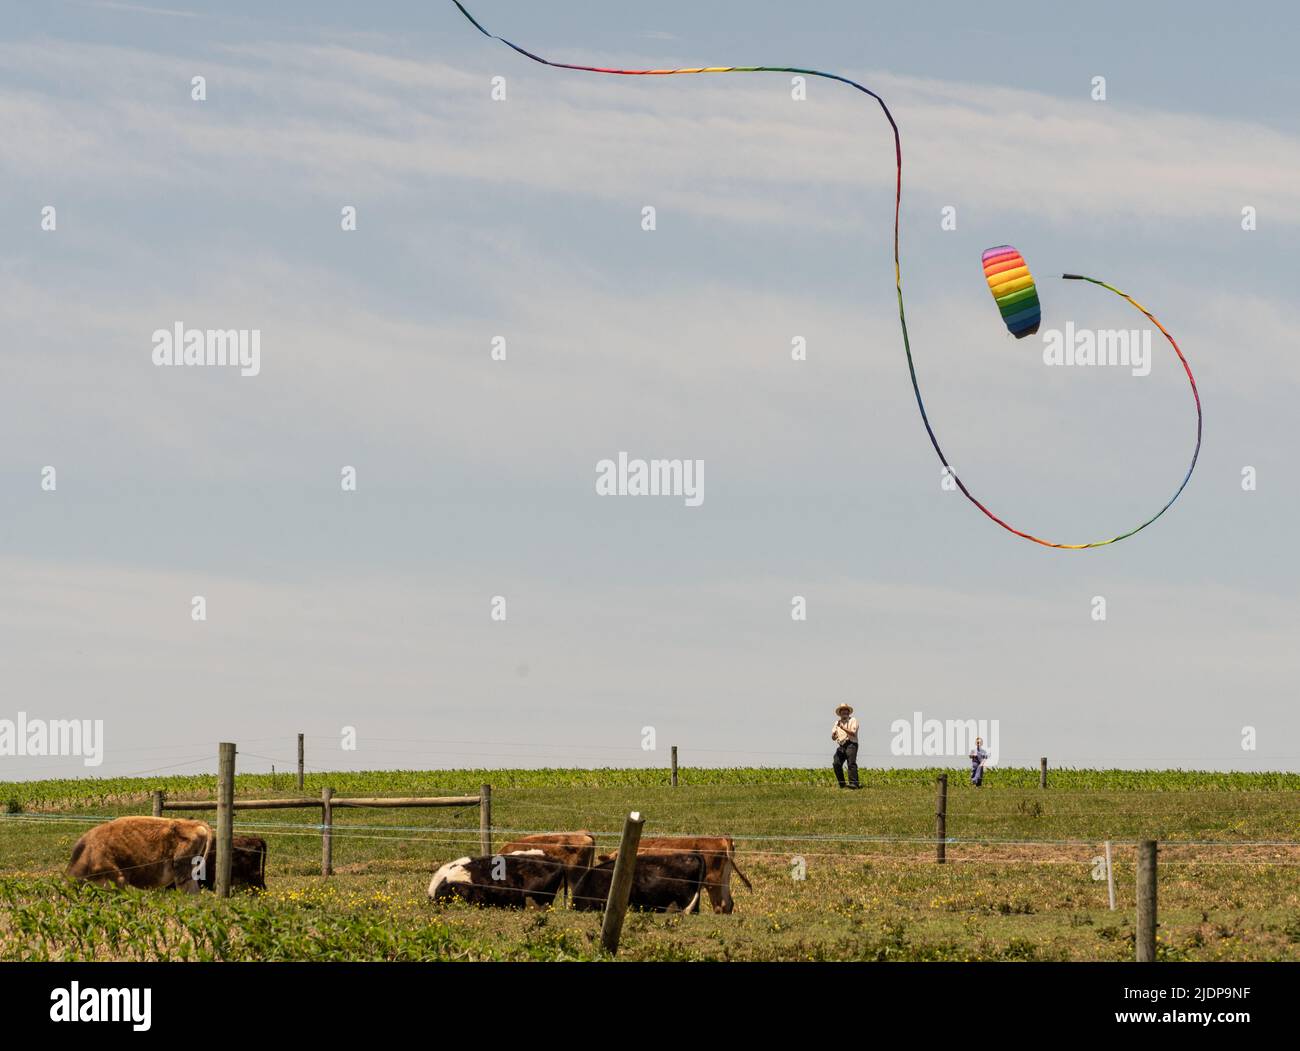 Ronks, Pennsylvania, June 19, 2022- Amish man flying a colorful rainbow kite on Sunday summer afternoon with small child watching Stock Photo